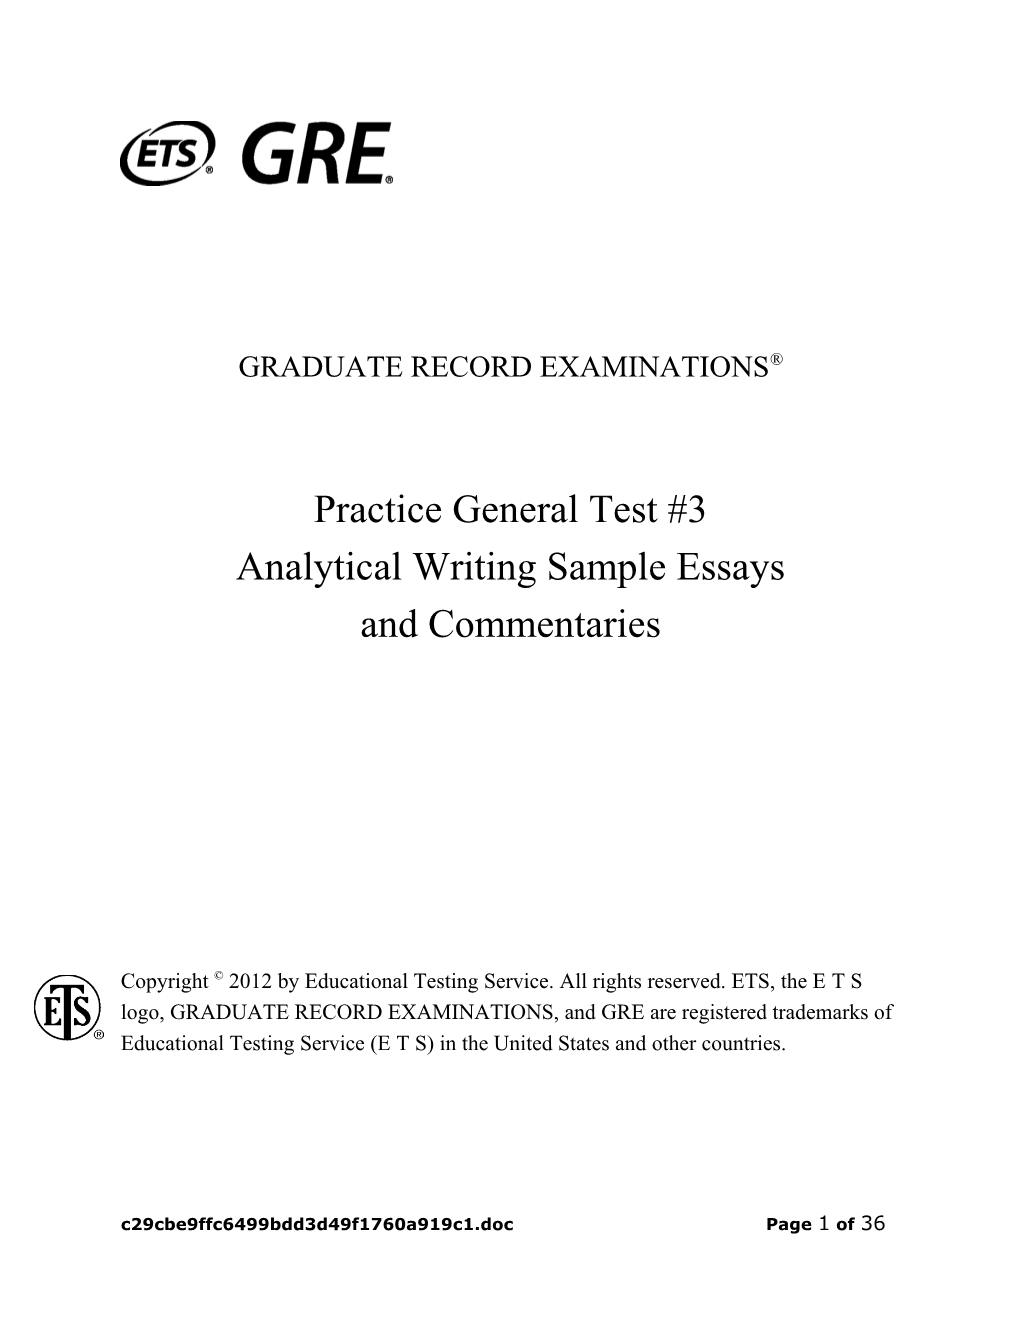 GRE Practice Test #3 Sample Essays and Commentaries